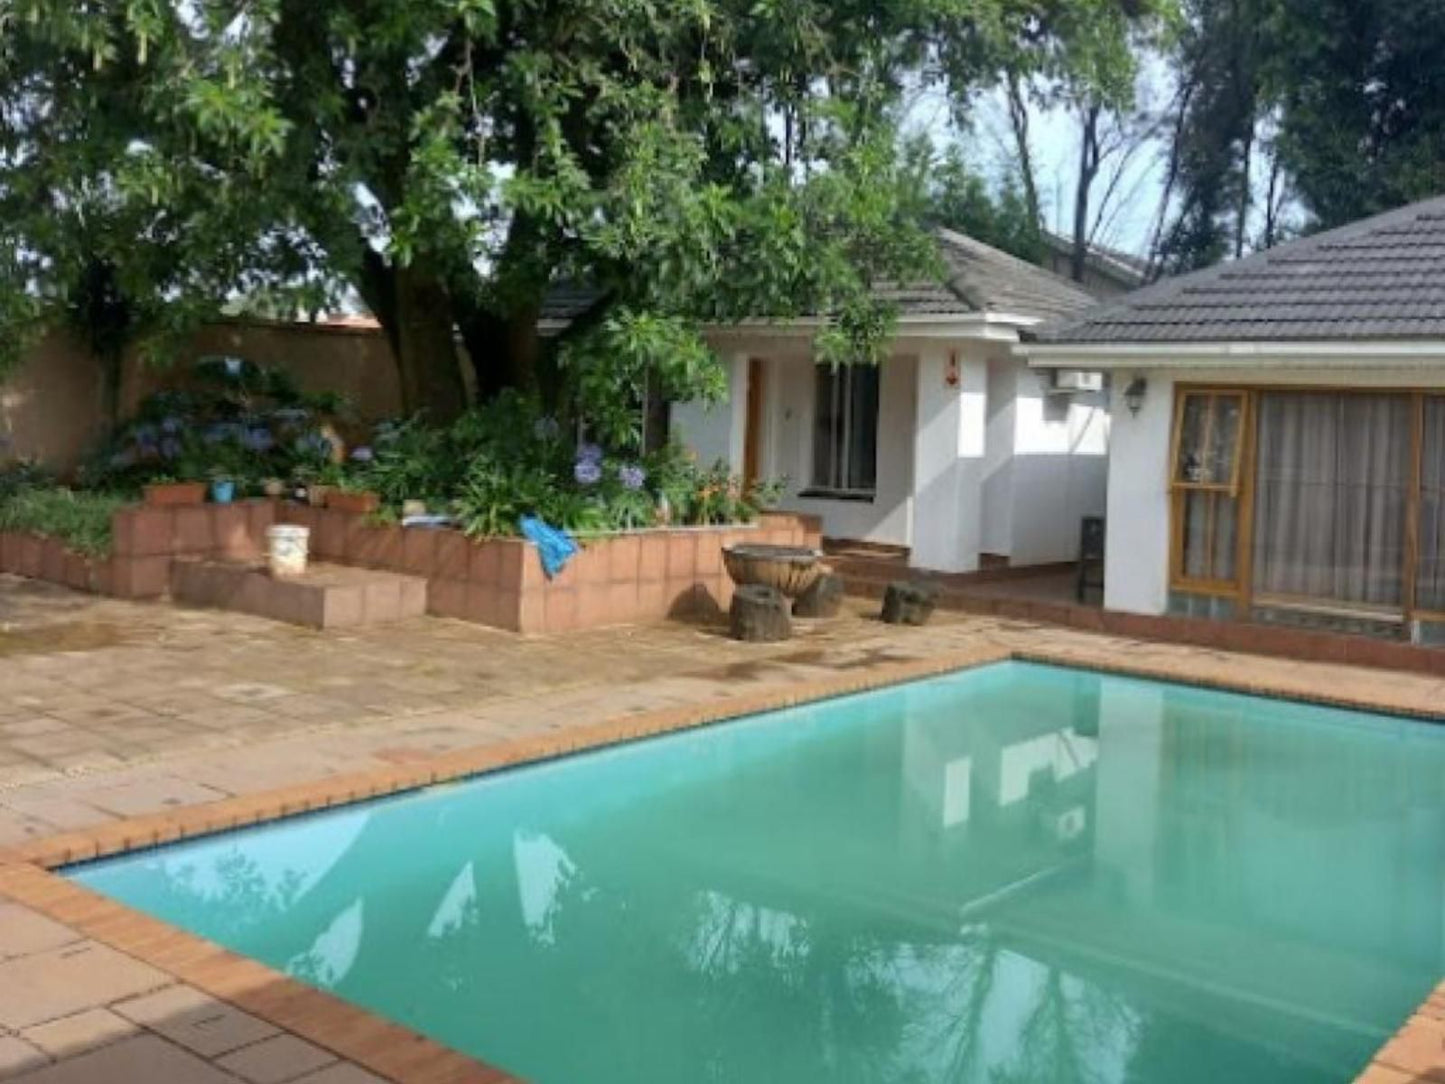 Alicia S Bed And Breakfast Ontdekkerspark Johannesburg Gauteng South Africa Complementary Colors, House, Building, Architecture, Swimming Pool